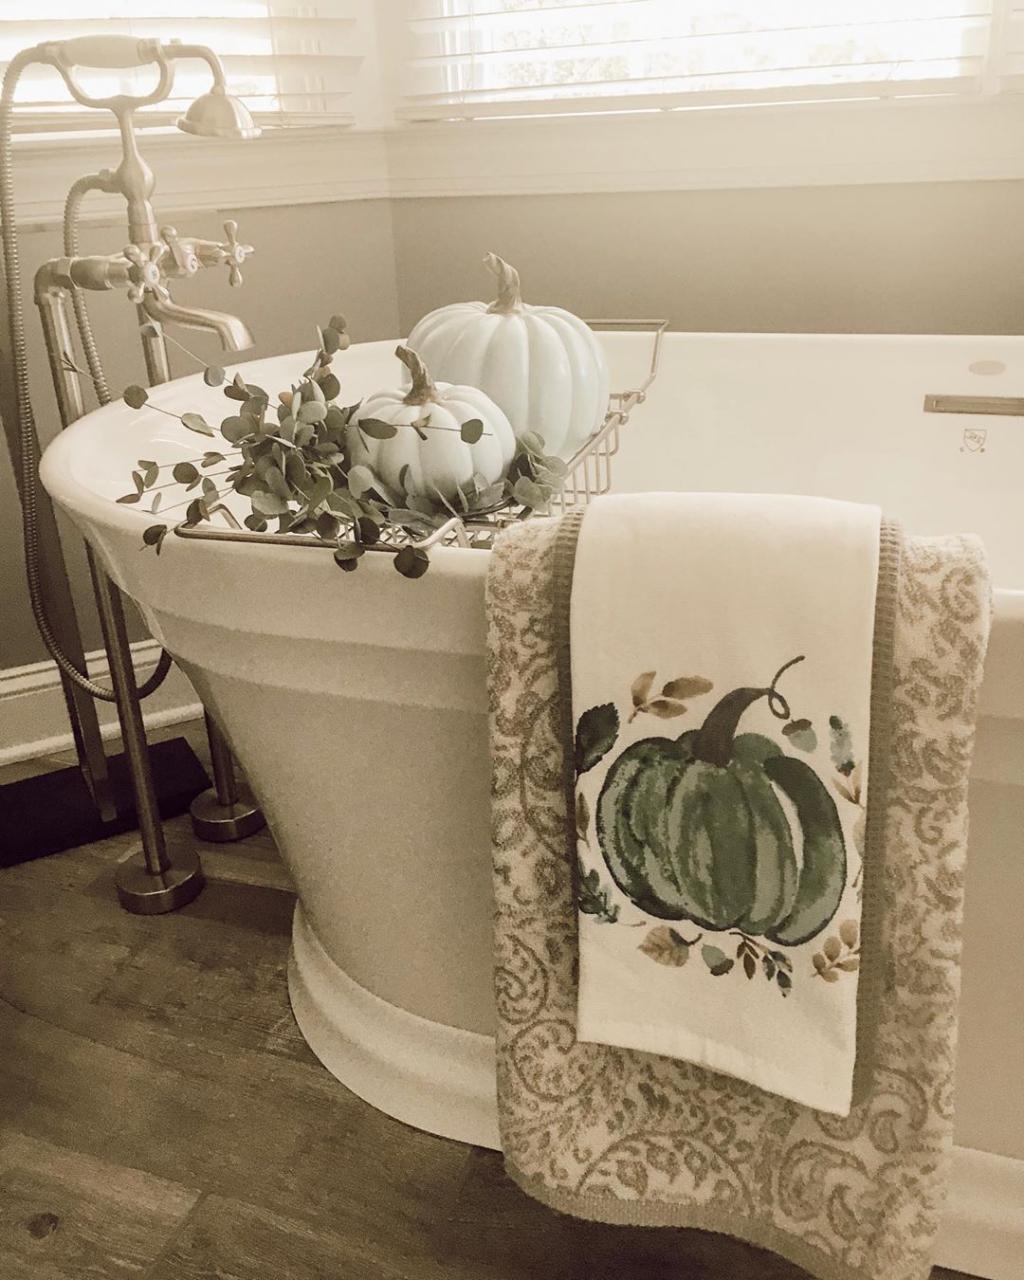 Wendy on Instagram “I’m sharing a little bit of fall decor in the